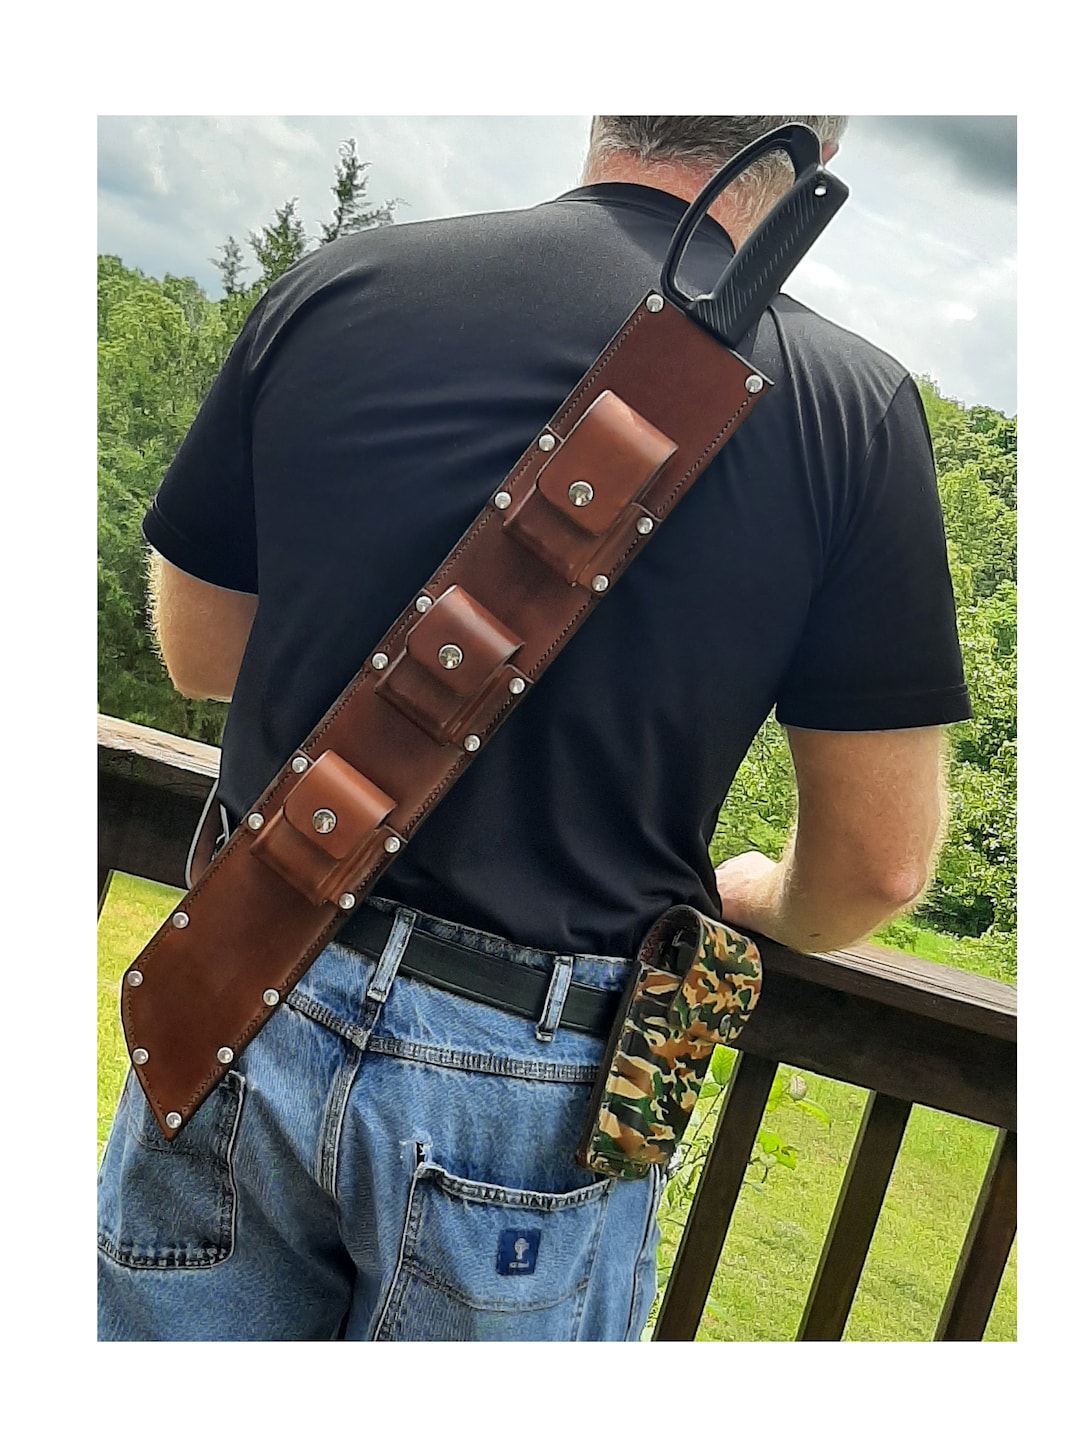 Machete Sheath Handmade With Shoulder Strap heavy THICK Leather